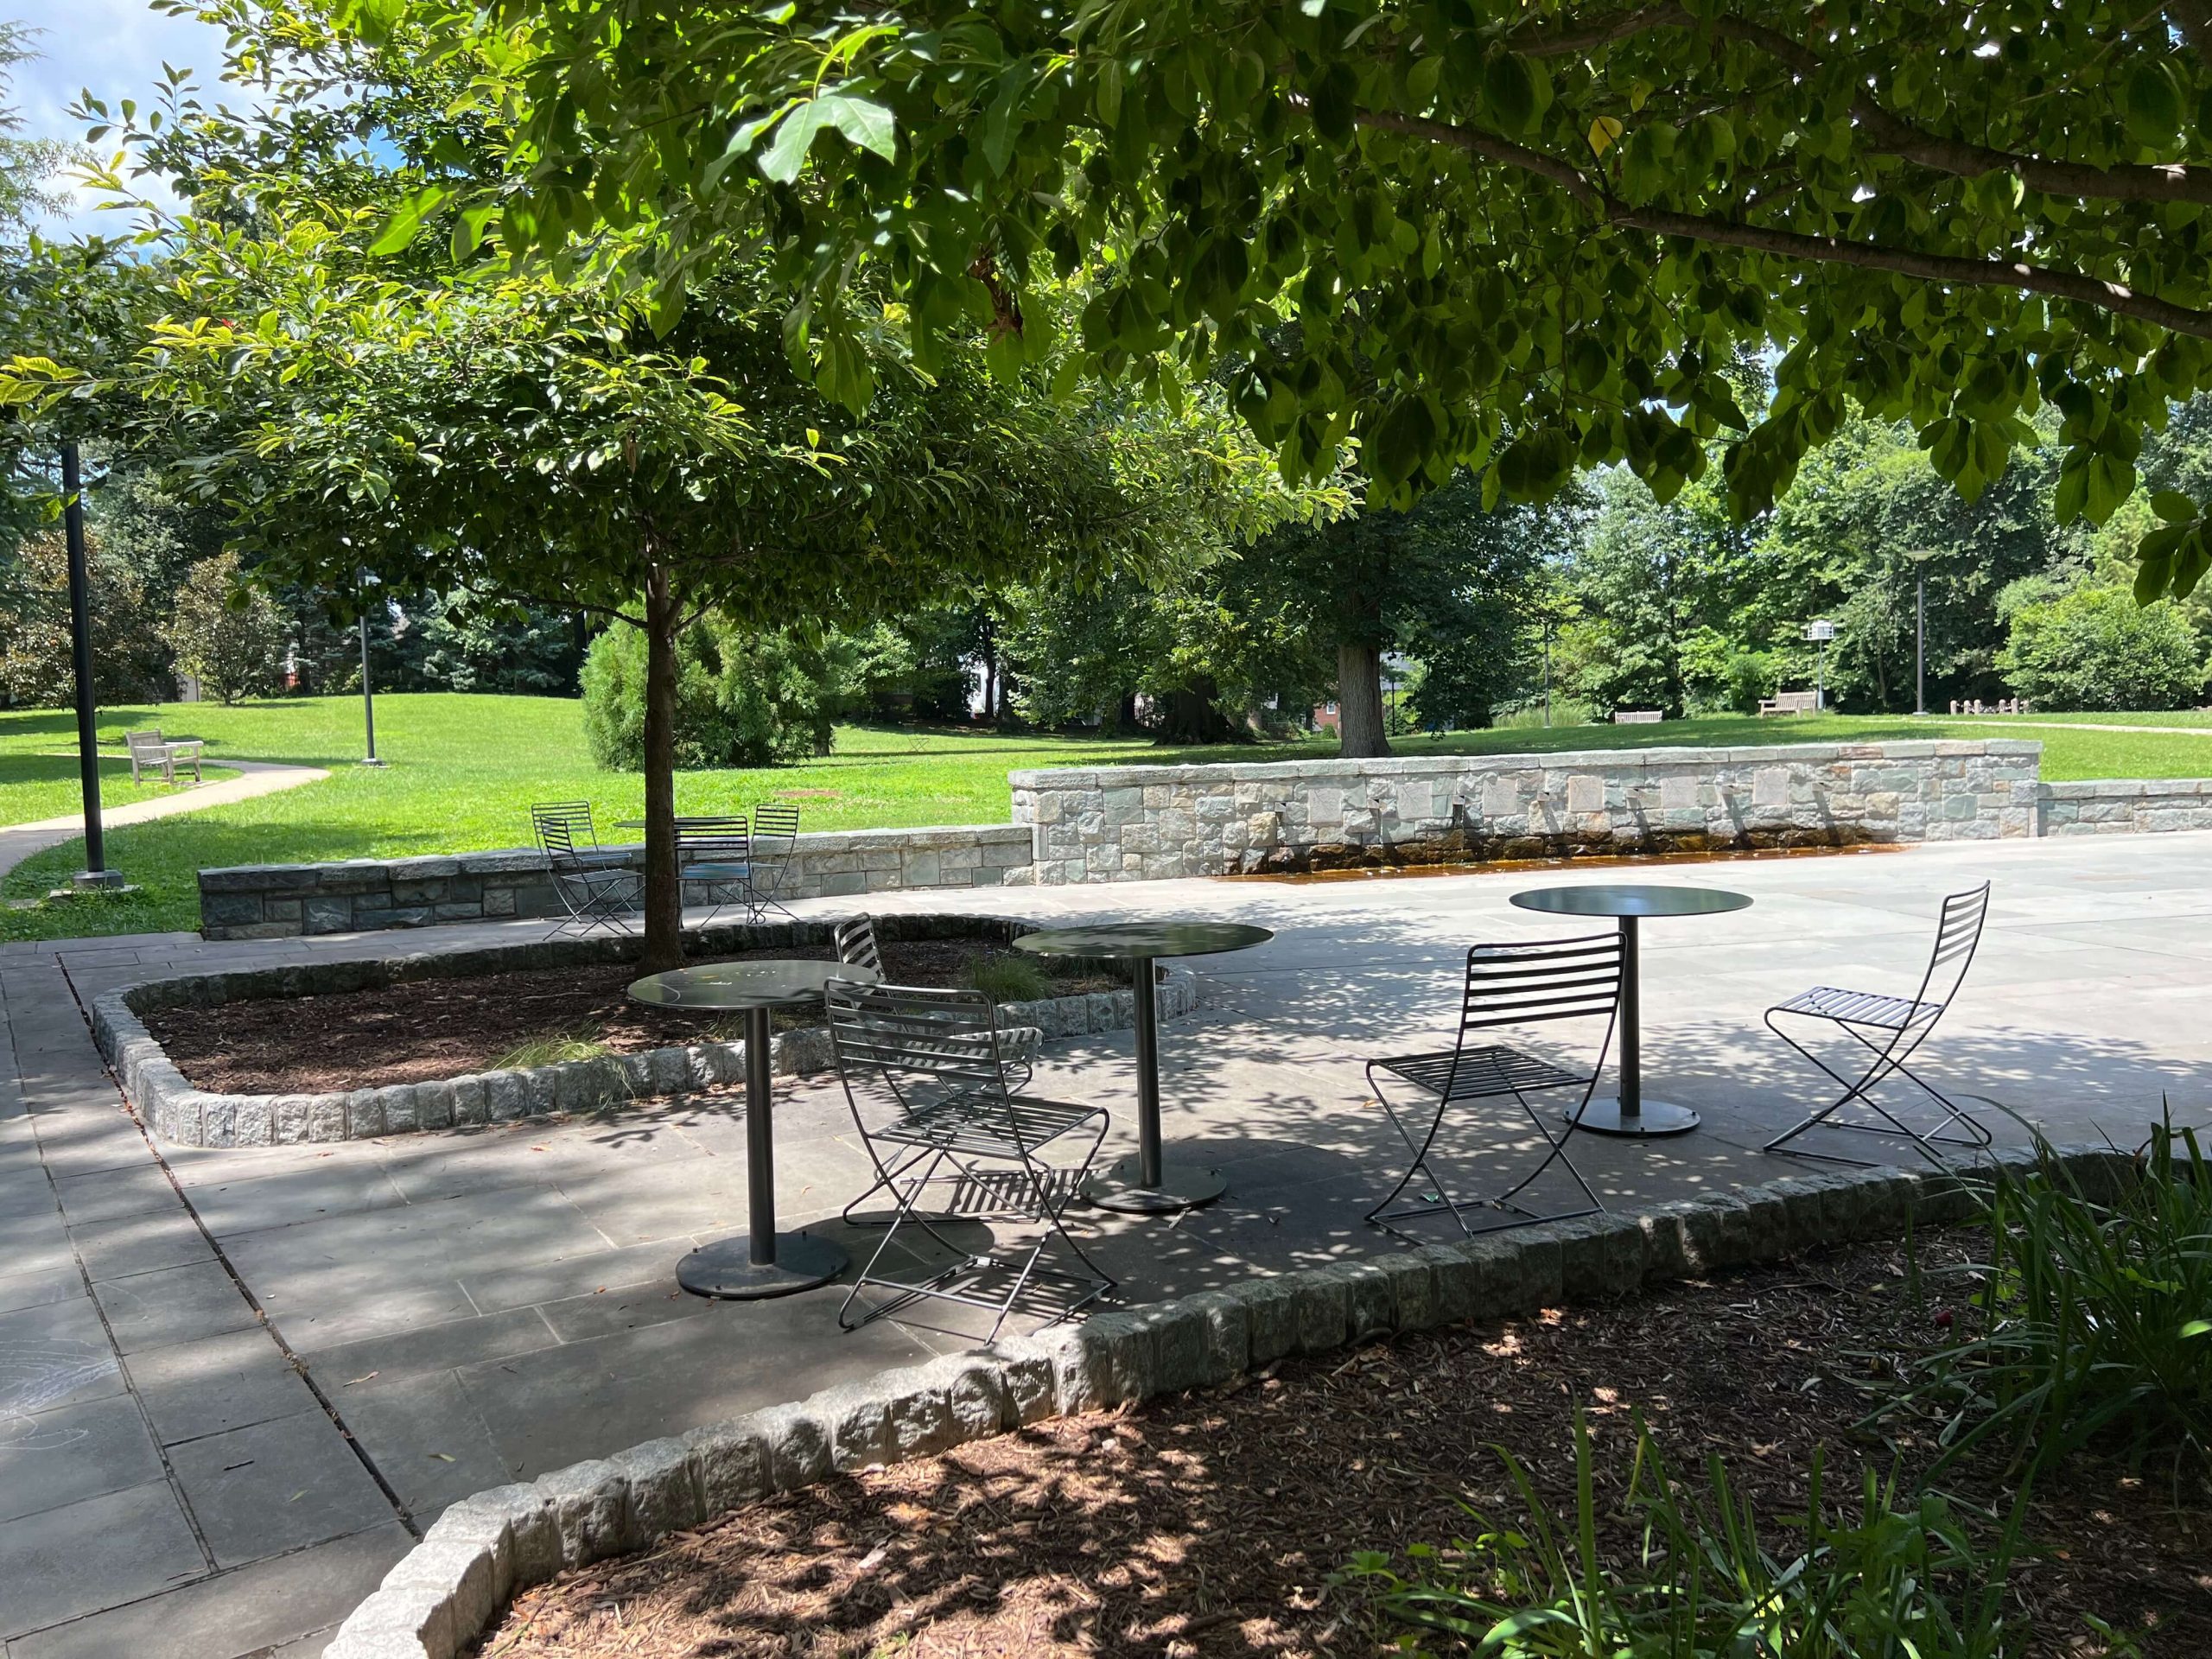 Urban park in the Friendship Heights neighborhood of Chevy Chase MD, where the Monarch Wellness counseling offices are located.